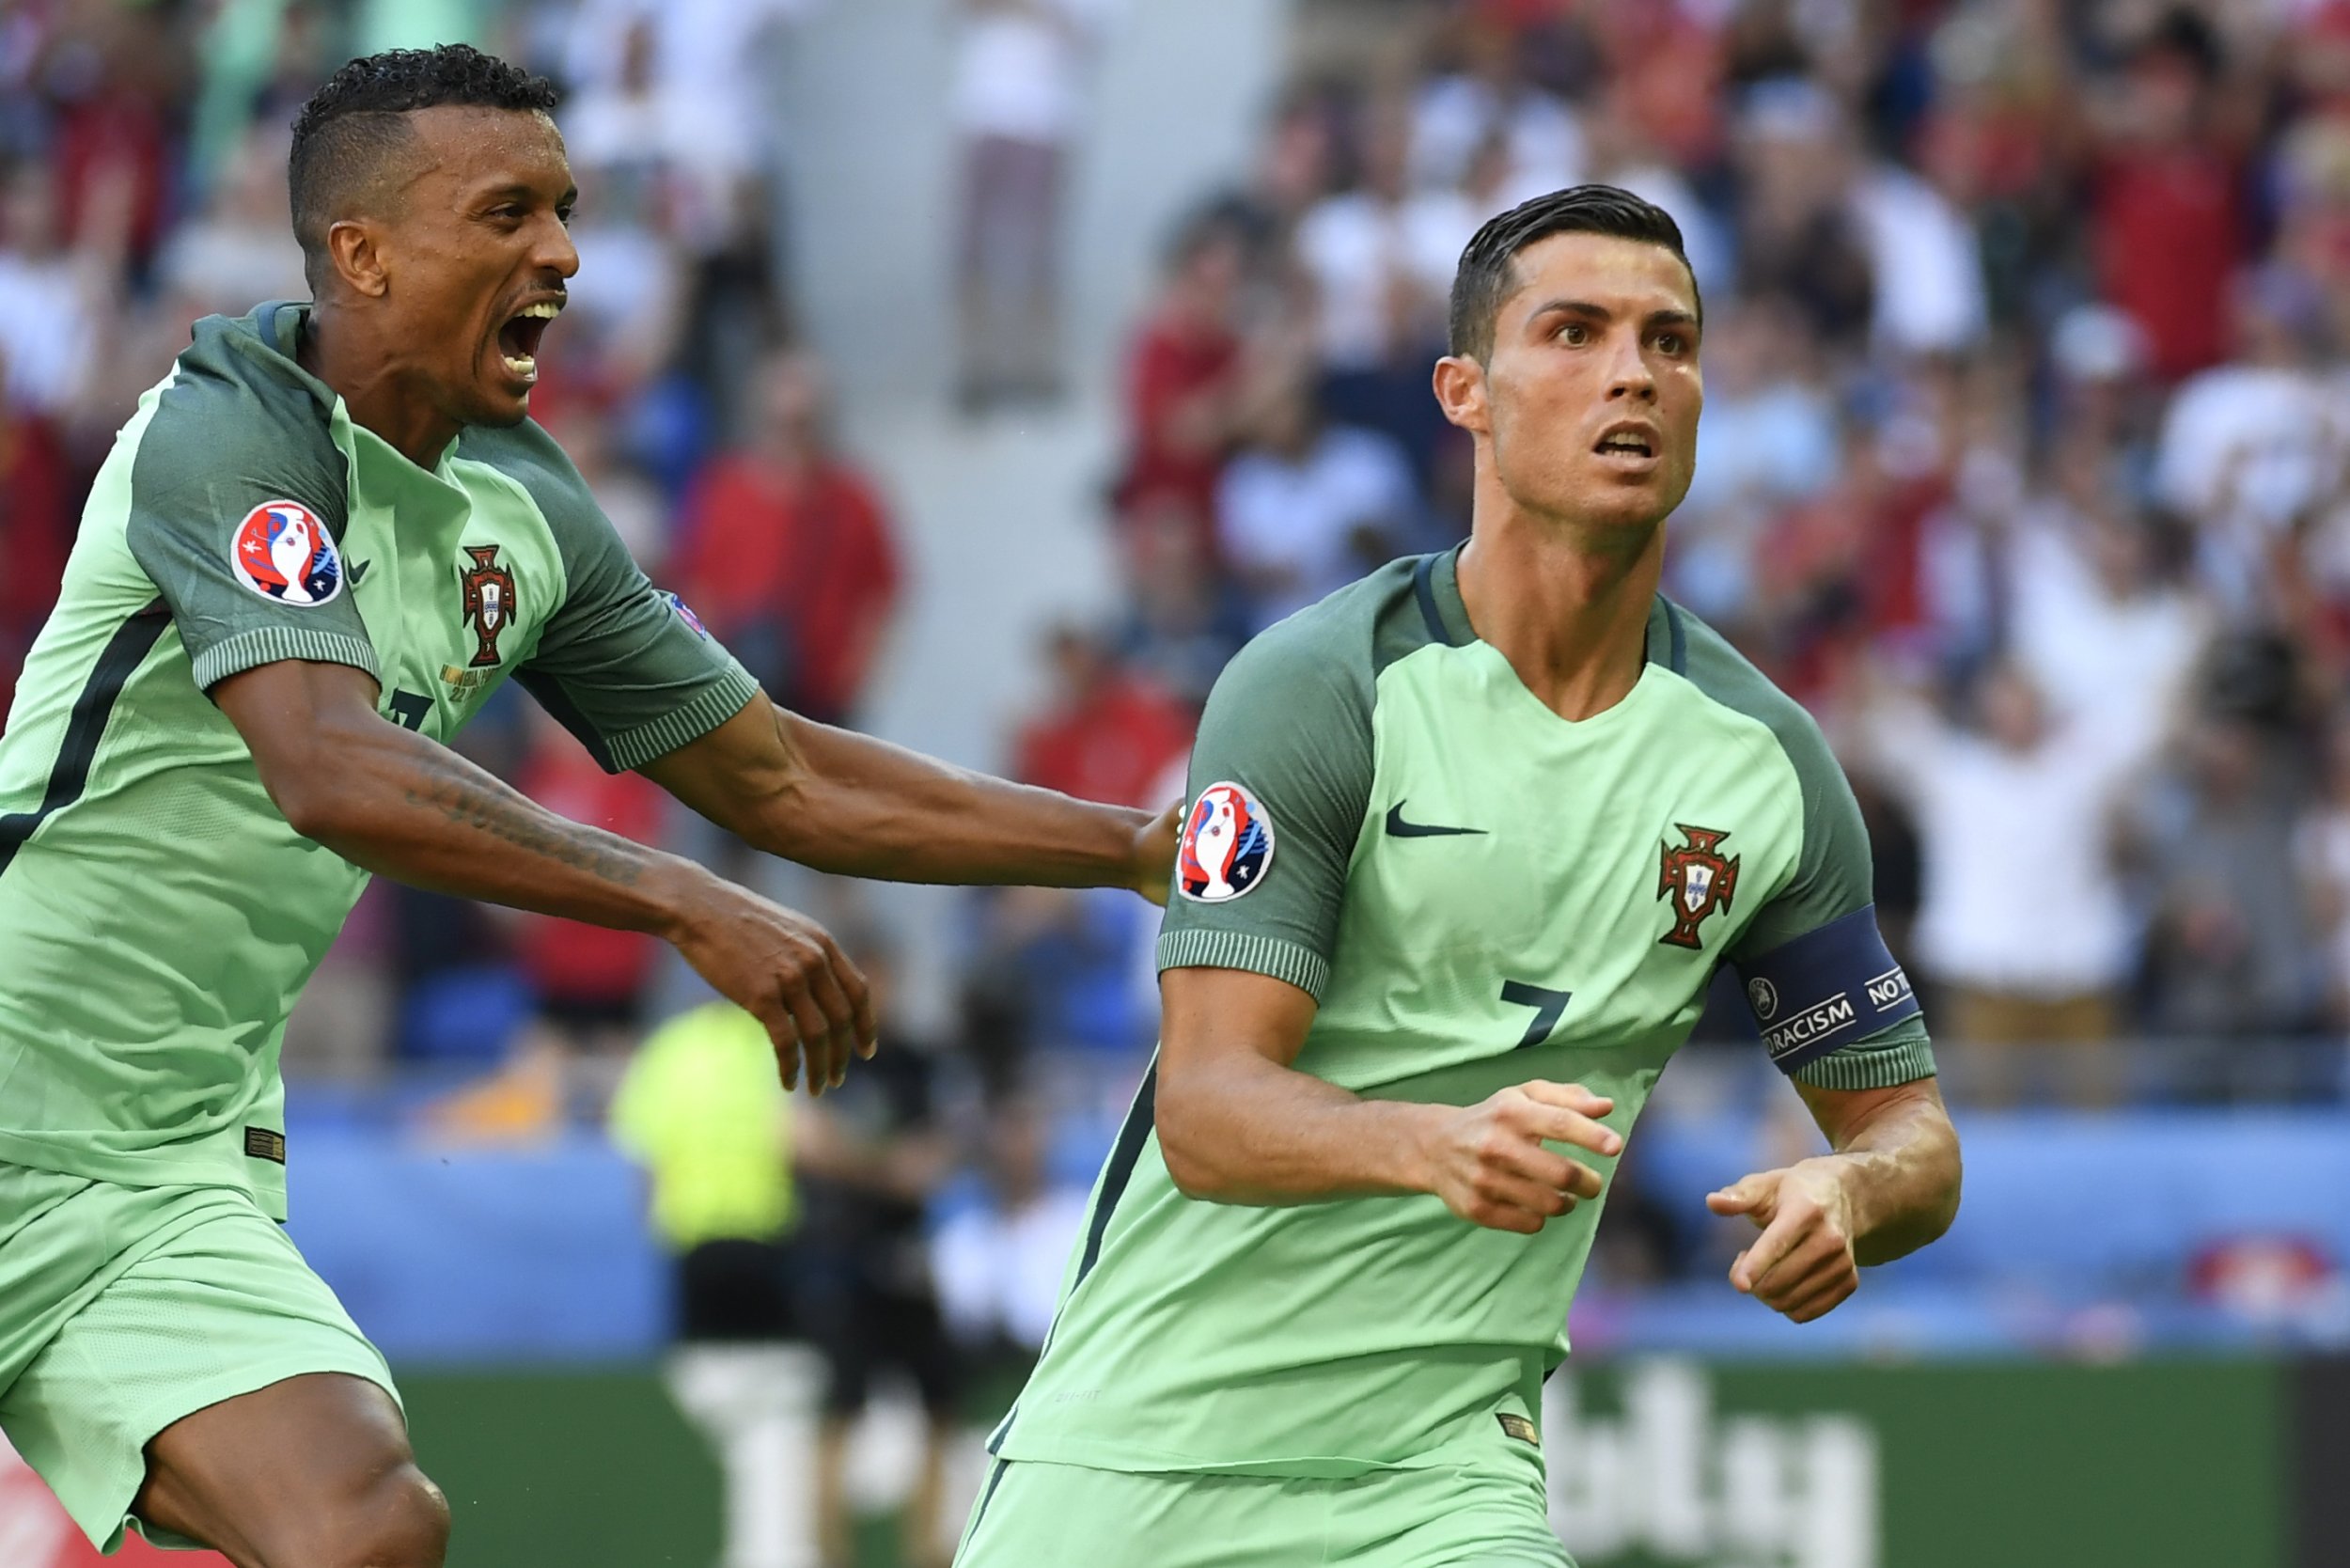 Video Portugal 3 3 Hungary Highlights Cristiano Ronaldo Double Keeps Portugal Alive In Euro